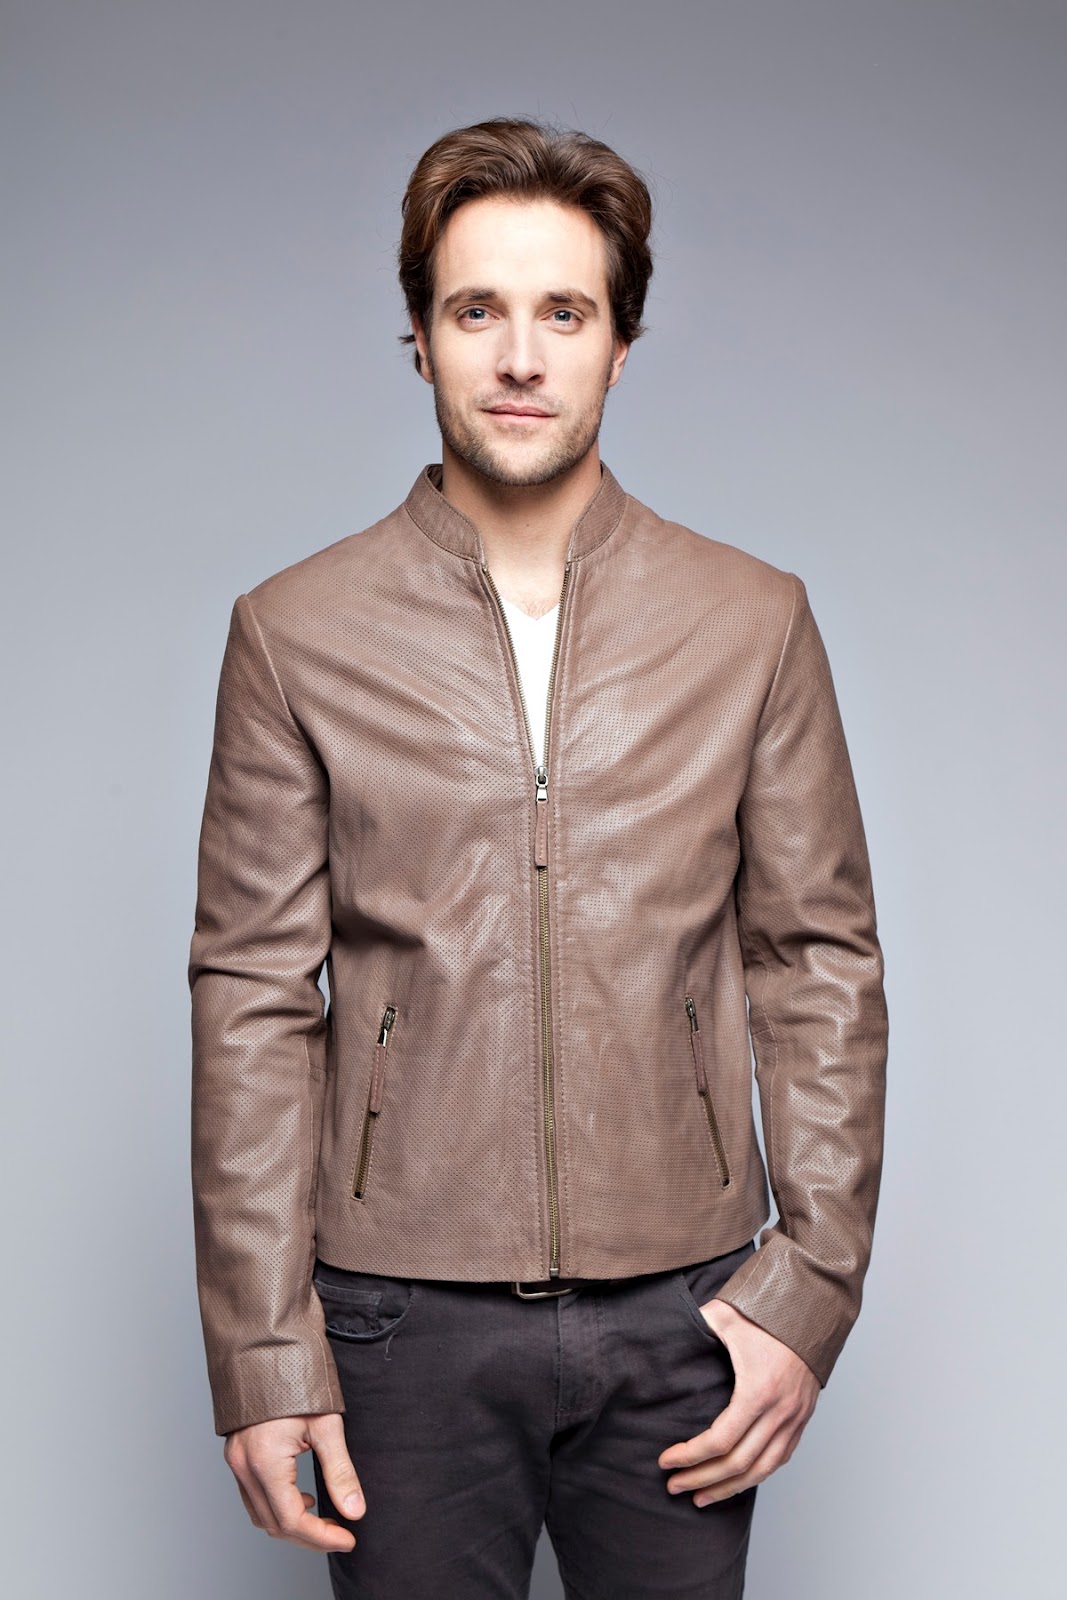 The leather jackets for women and men by Prestige Cuir: Leather jackets ...